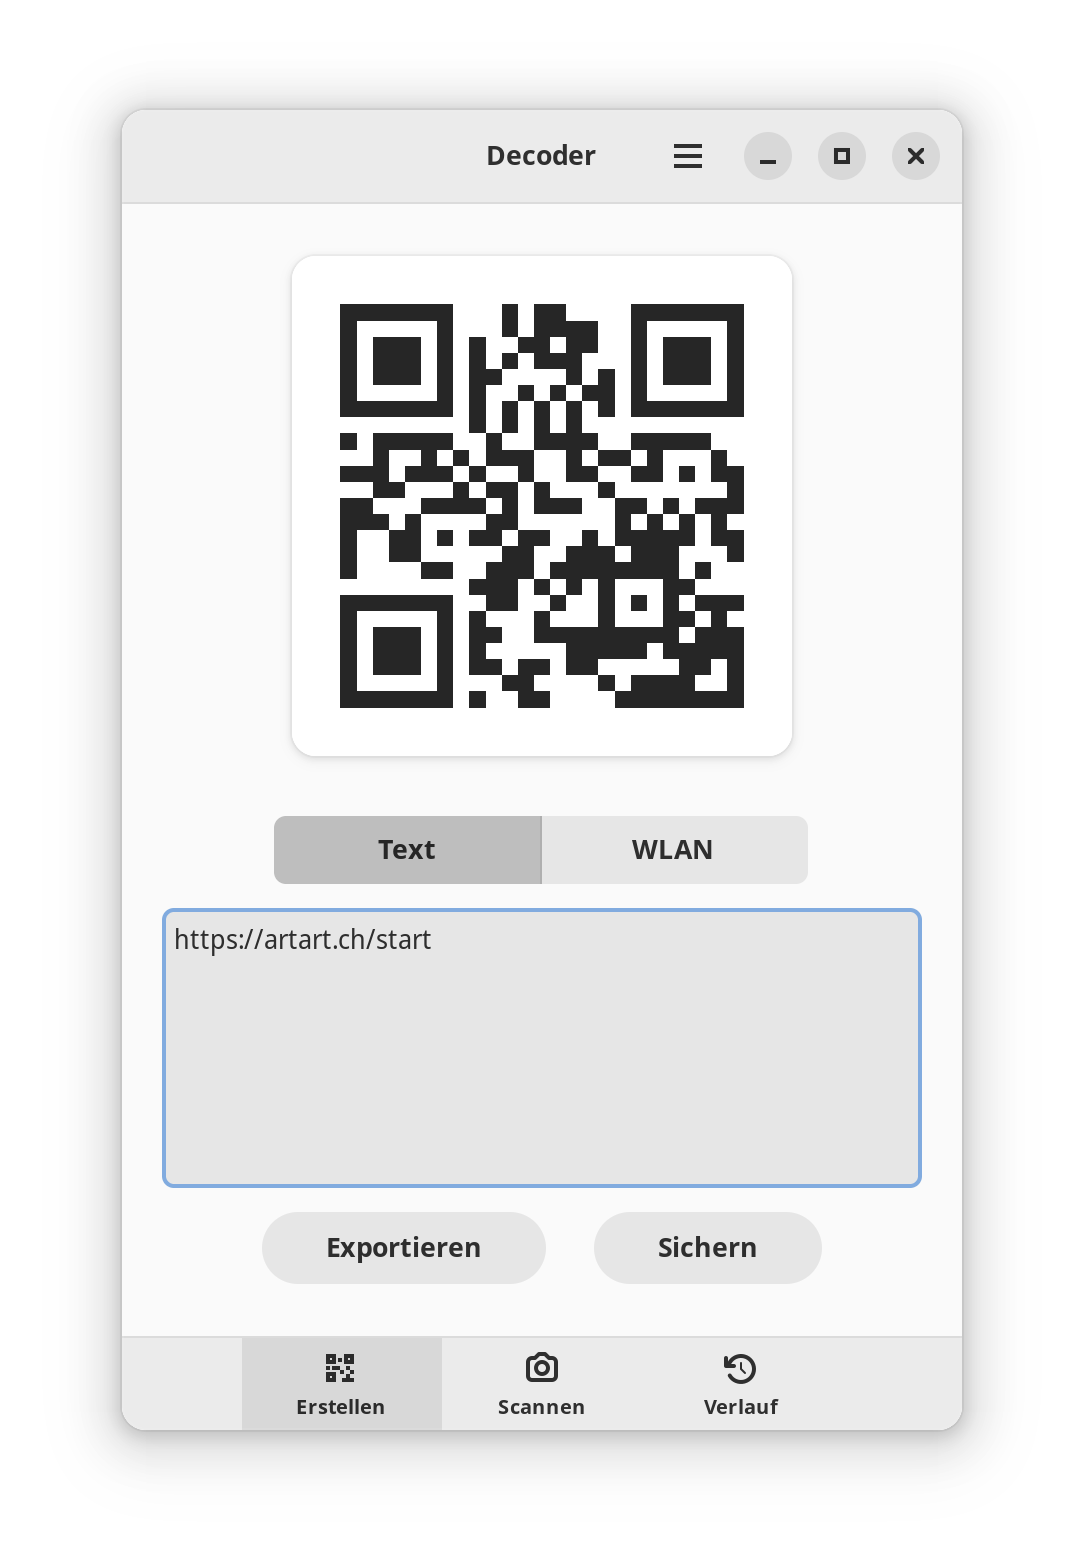 create-qr-codes-with-decoder-archyde